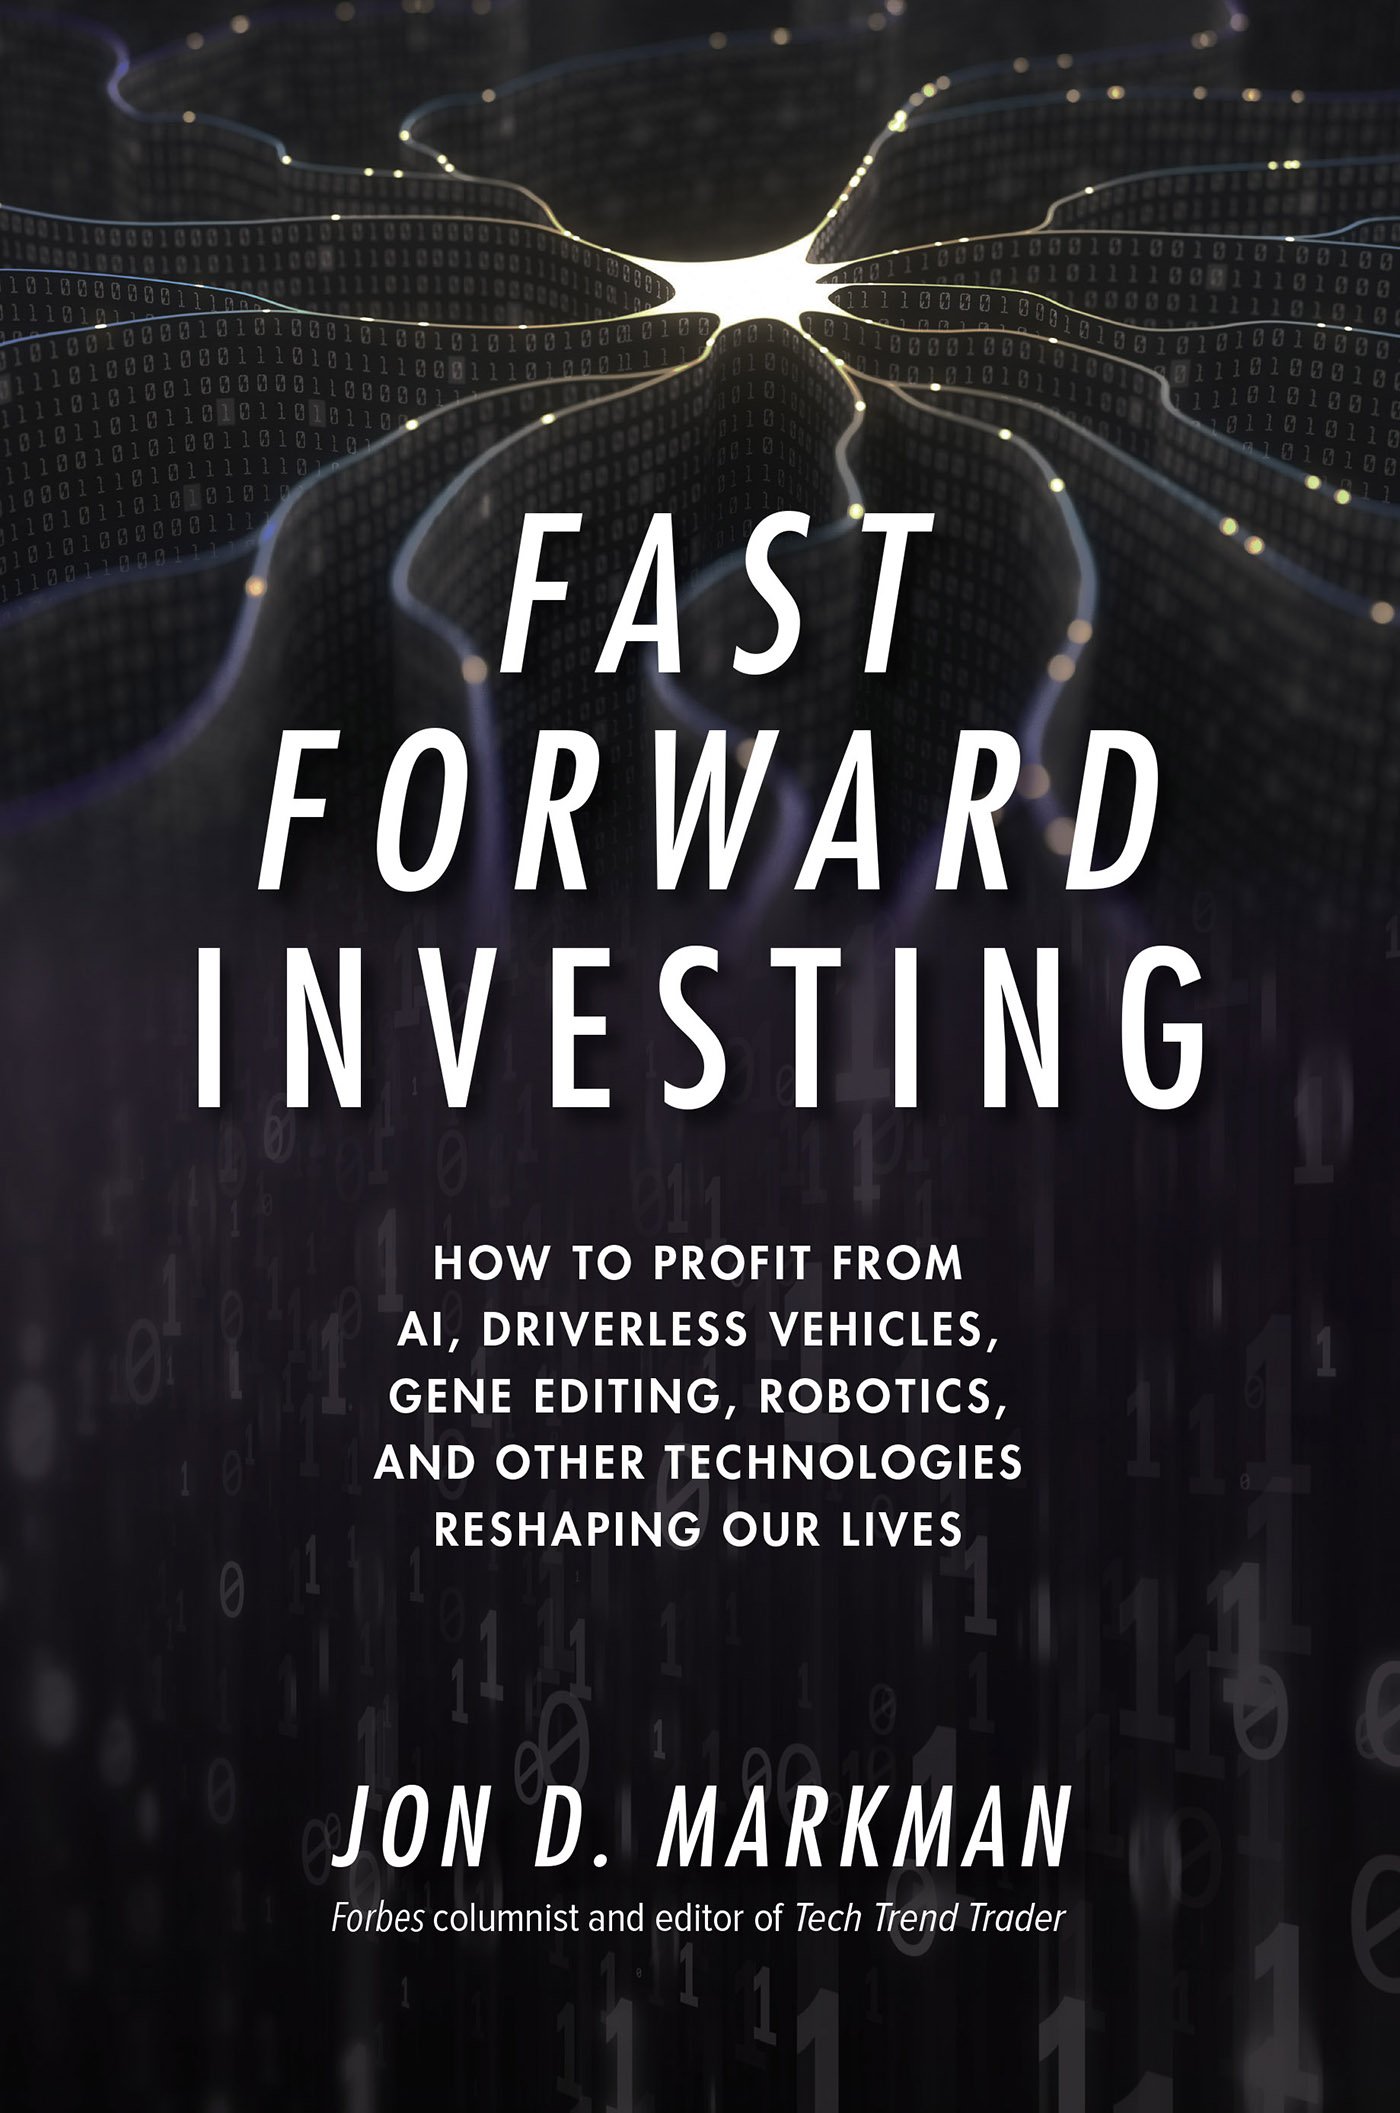 Fast-Forward-Investing-How-to-Profit-from-AI-Driverless-Vehicles-Gene-Editing-Robotics-and-Other-Technologies-Reshaping-Our-Lives